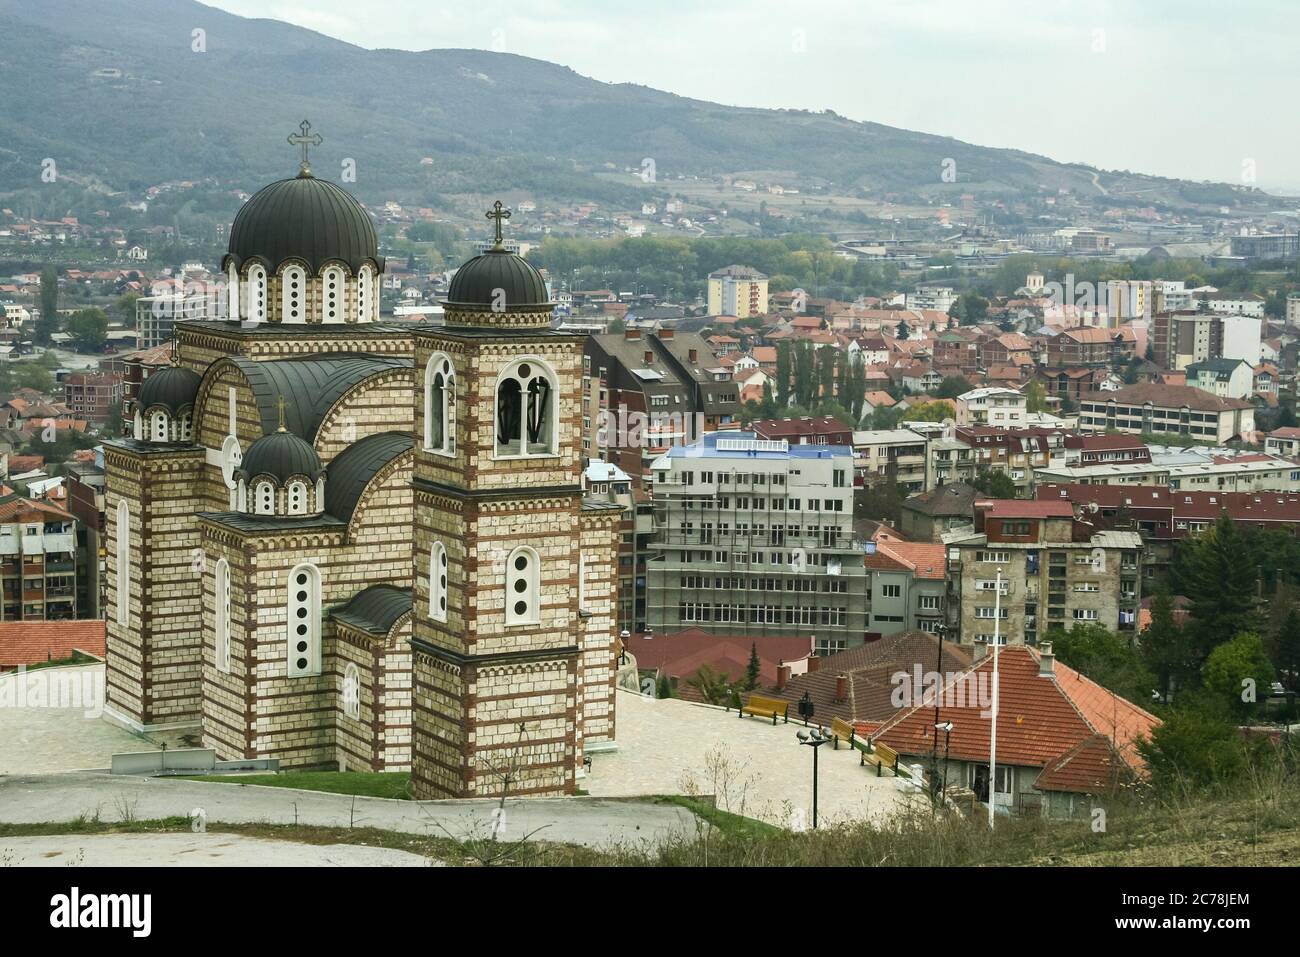 Church of Saint Demetrius in North mitrovica, Kosovo. It is a serbian orthodox church, a symbol of the division between albanians and serbs in the cit Stock Photo